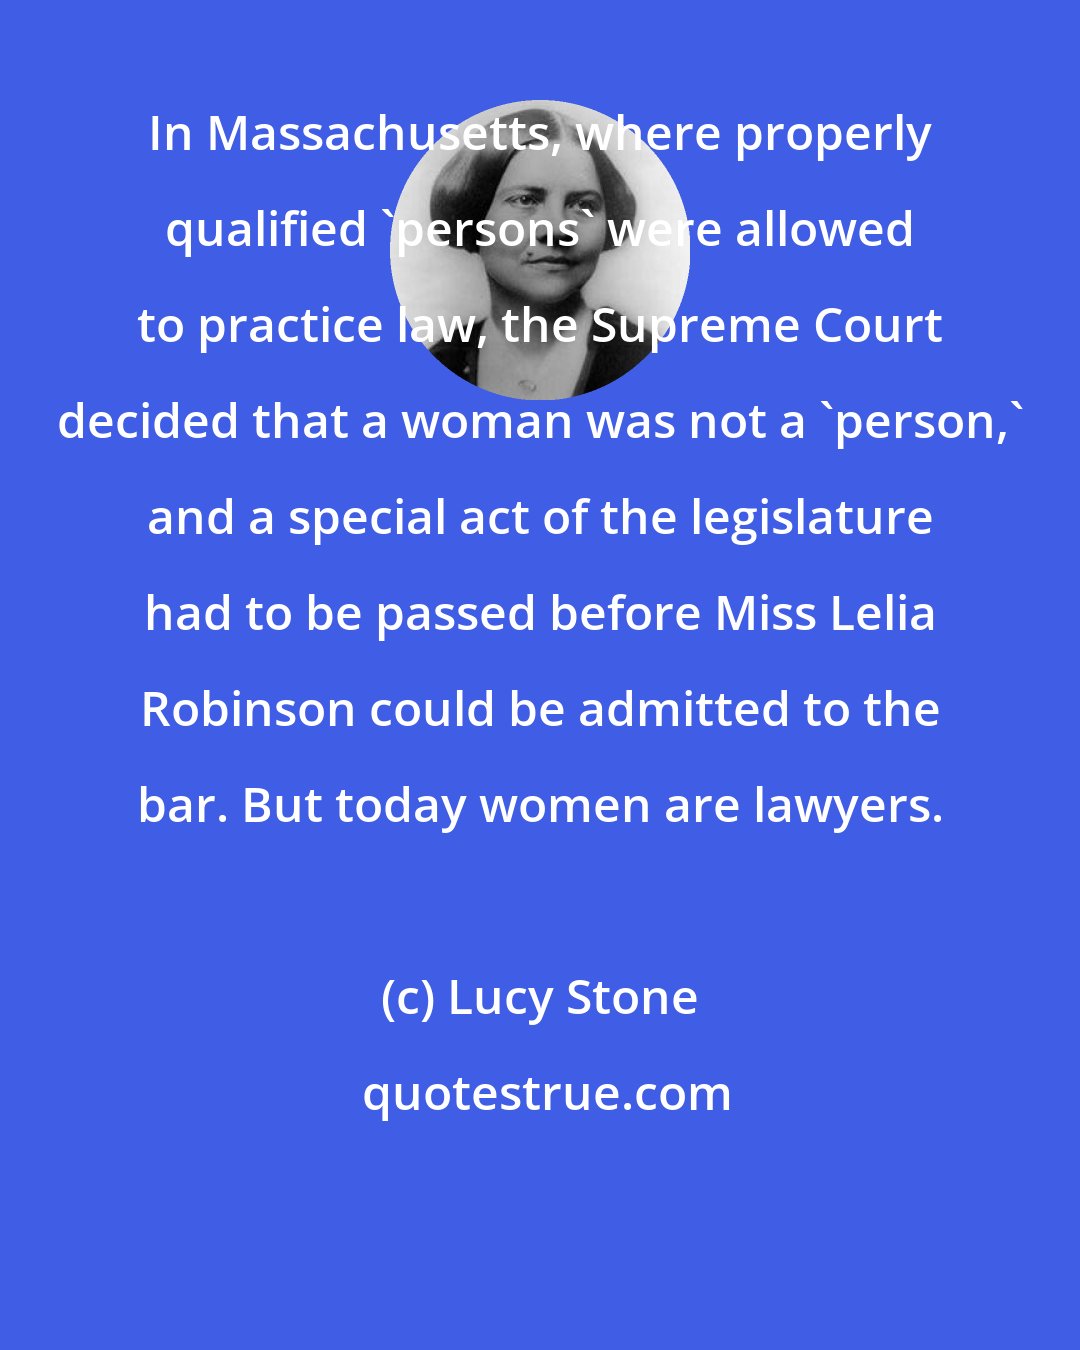 Lucy Stone: In Massachusetts, where properly qualified 'persons' were allowed to practice law, the Supreme Court decided that a woman was not a 'person,' and a special act of the legislature had to be passed before Miss Lelia Robinson could be admitted to the bar. But today women are lawyers.